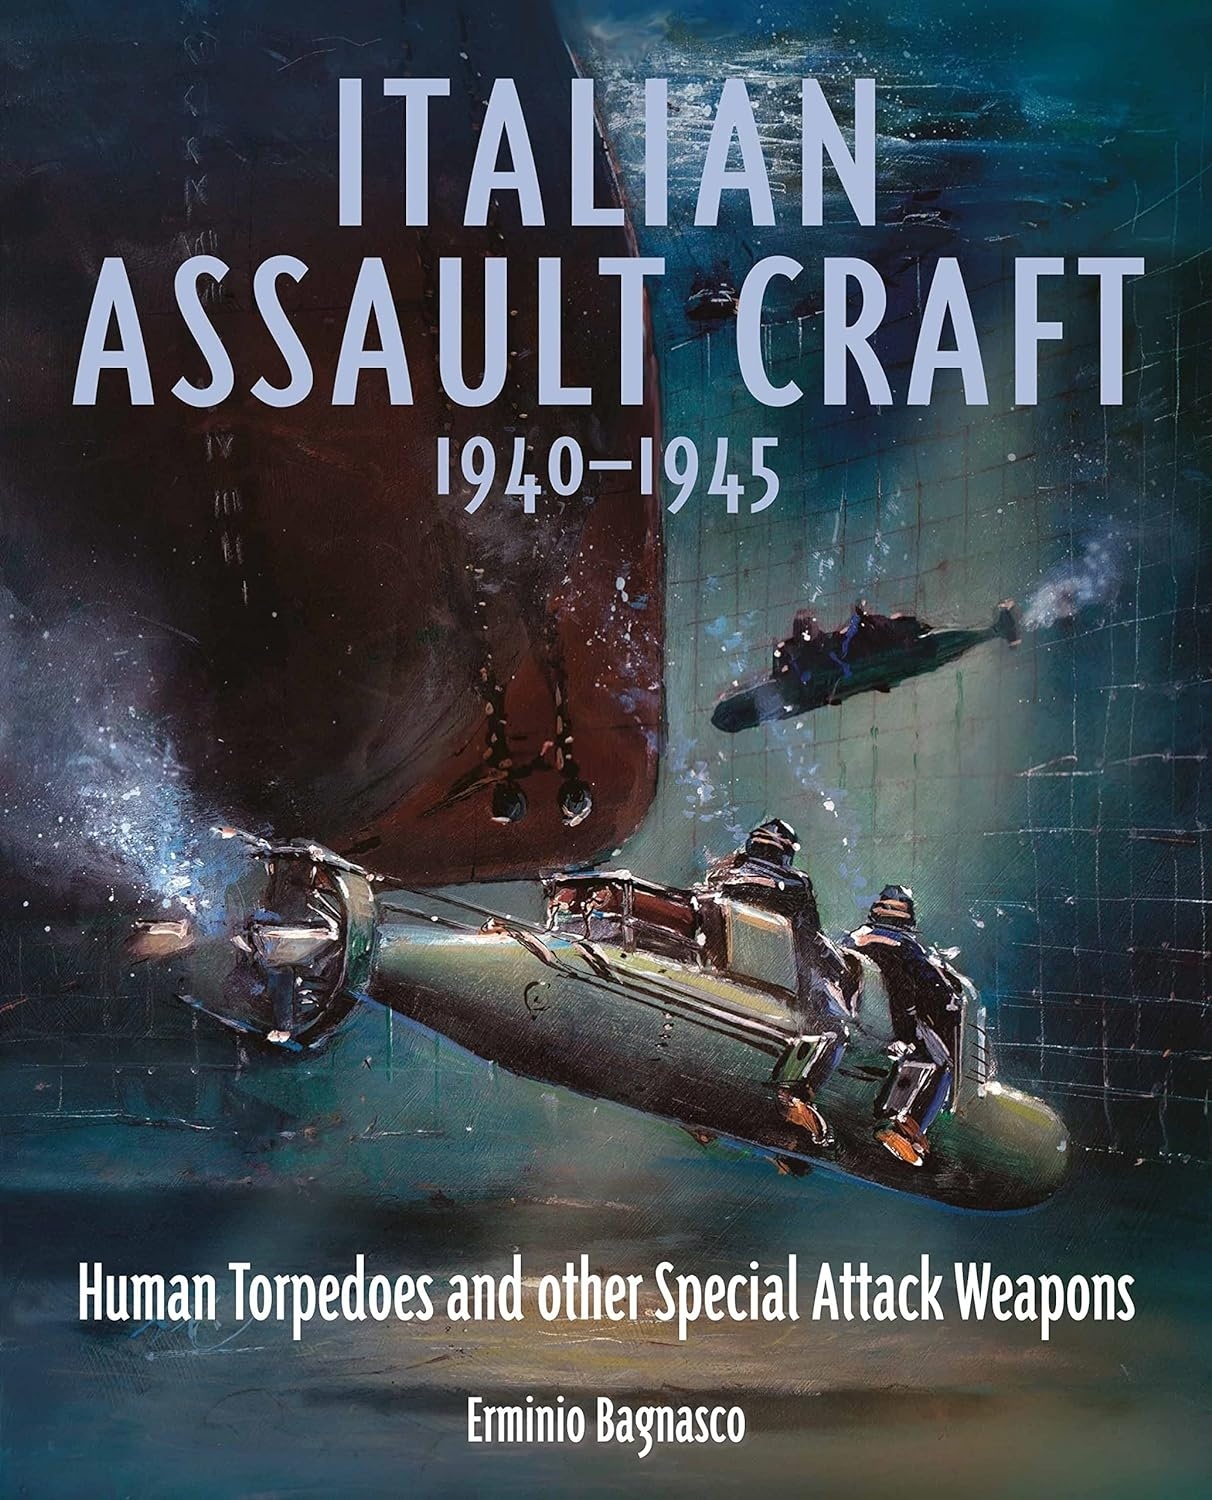 Italian Assault Craft, 1940-1945 "Human Torpedoes and other Special Attack Weapons"